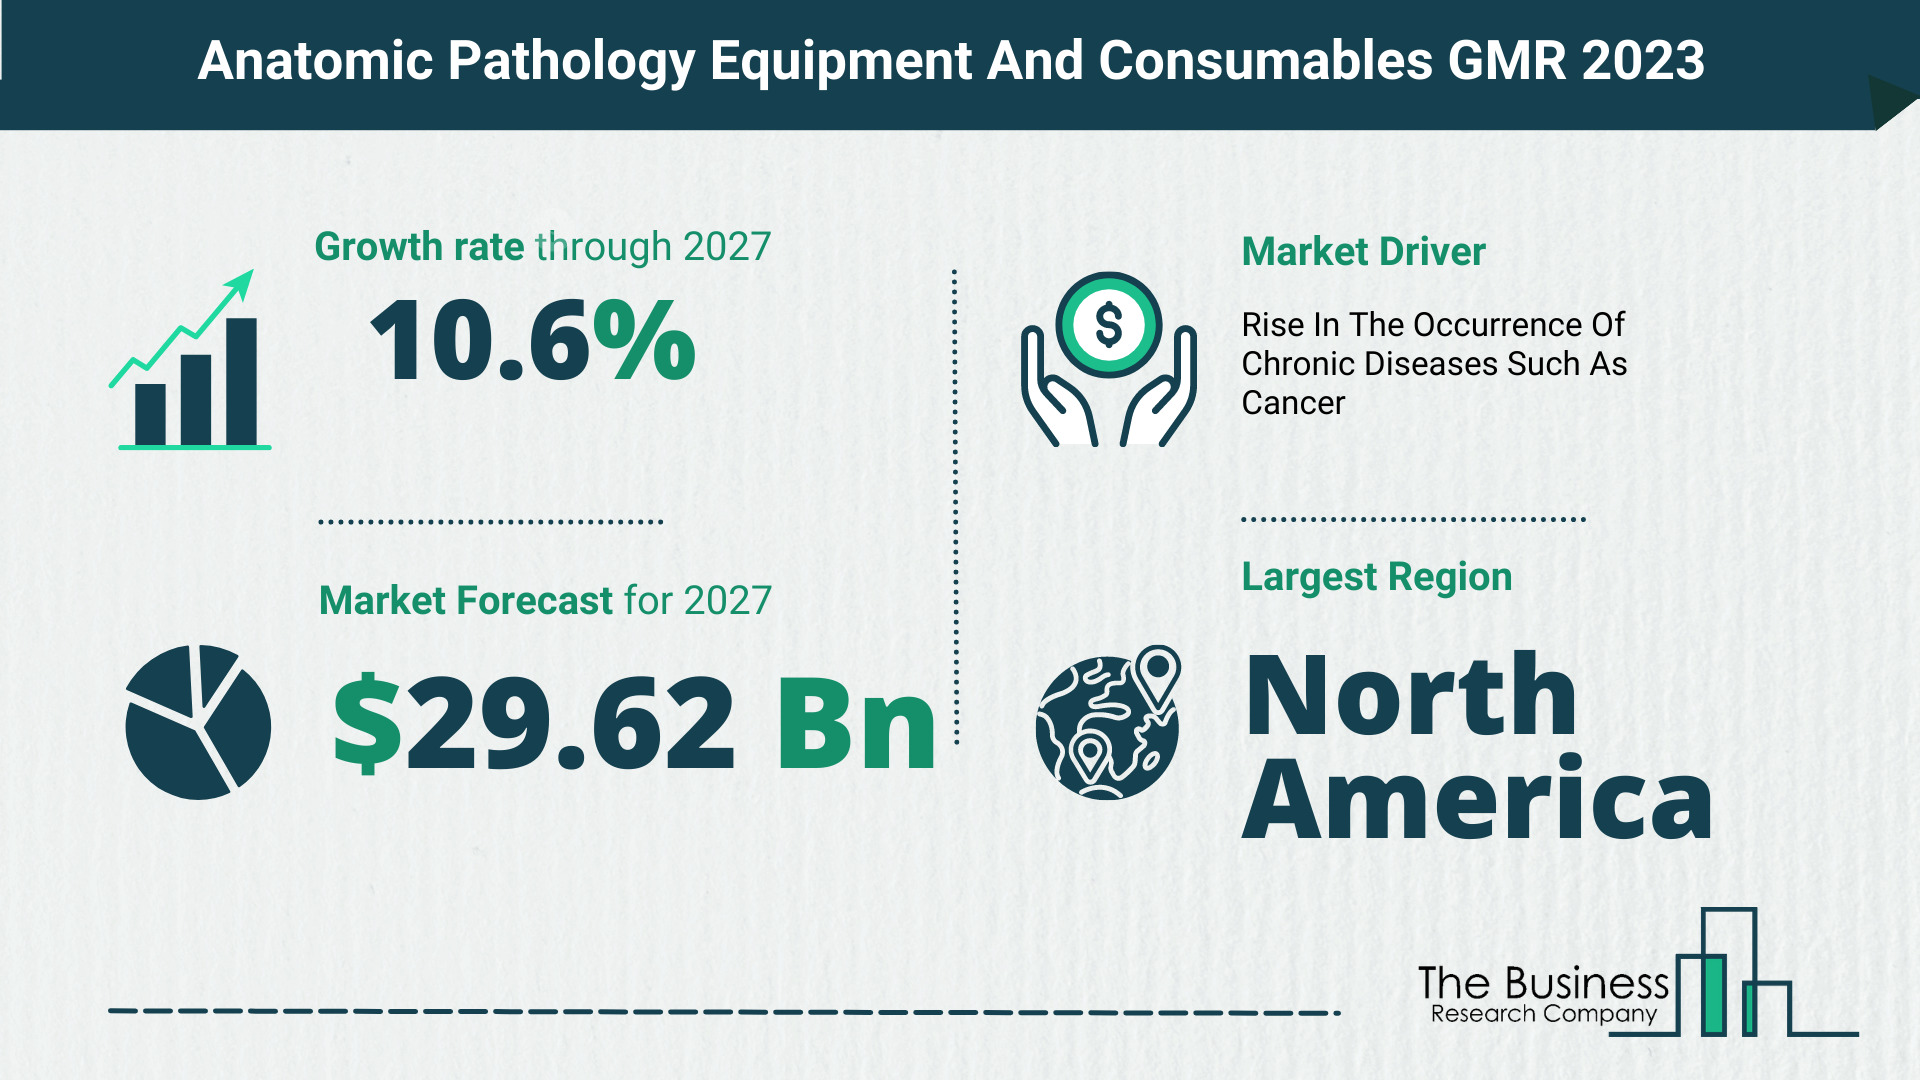 How Will The Anatomic Pathology Equipment And Consumables Market Size Grow In The Coming Years?